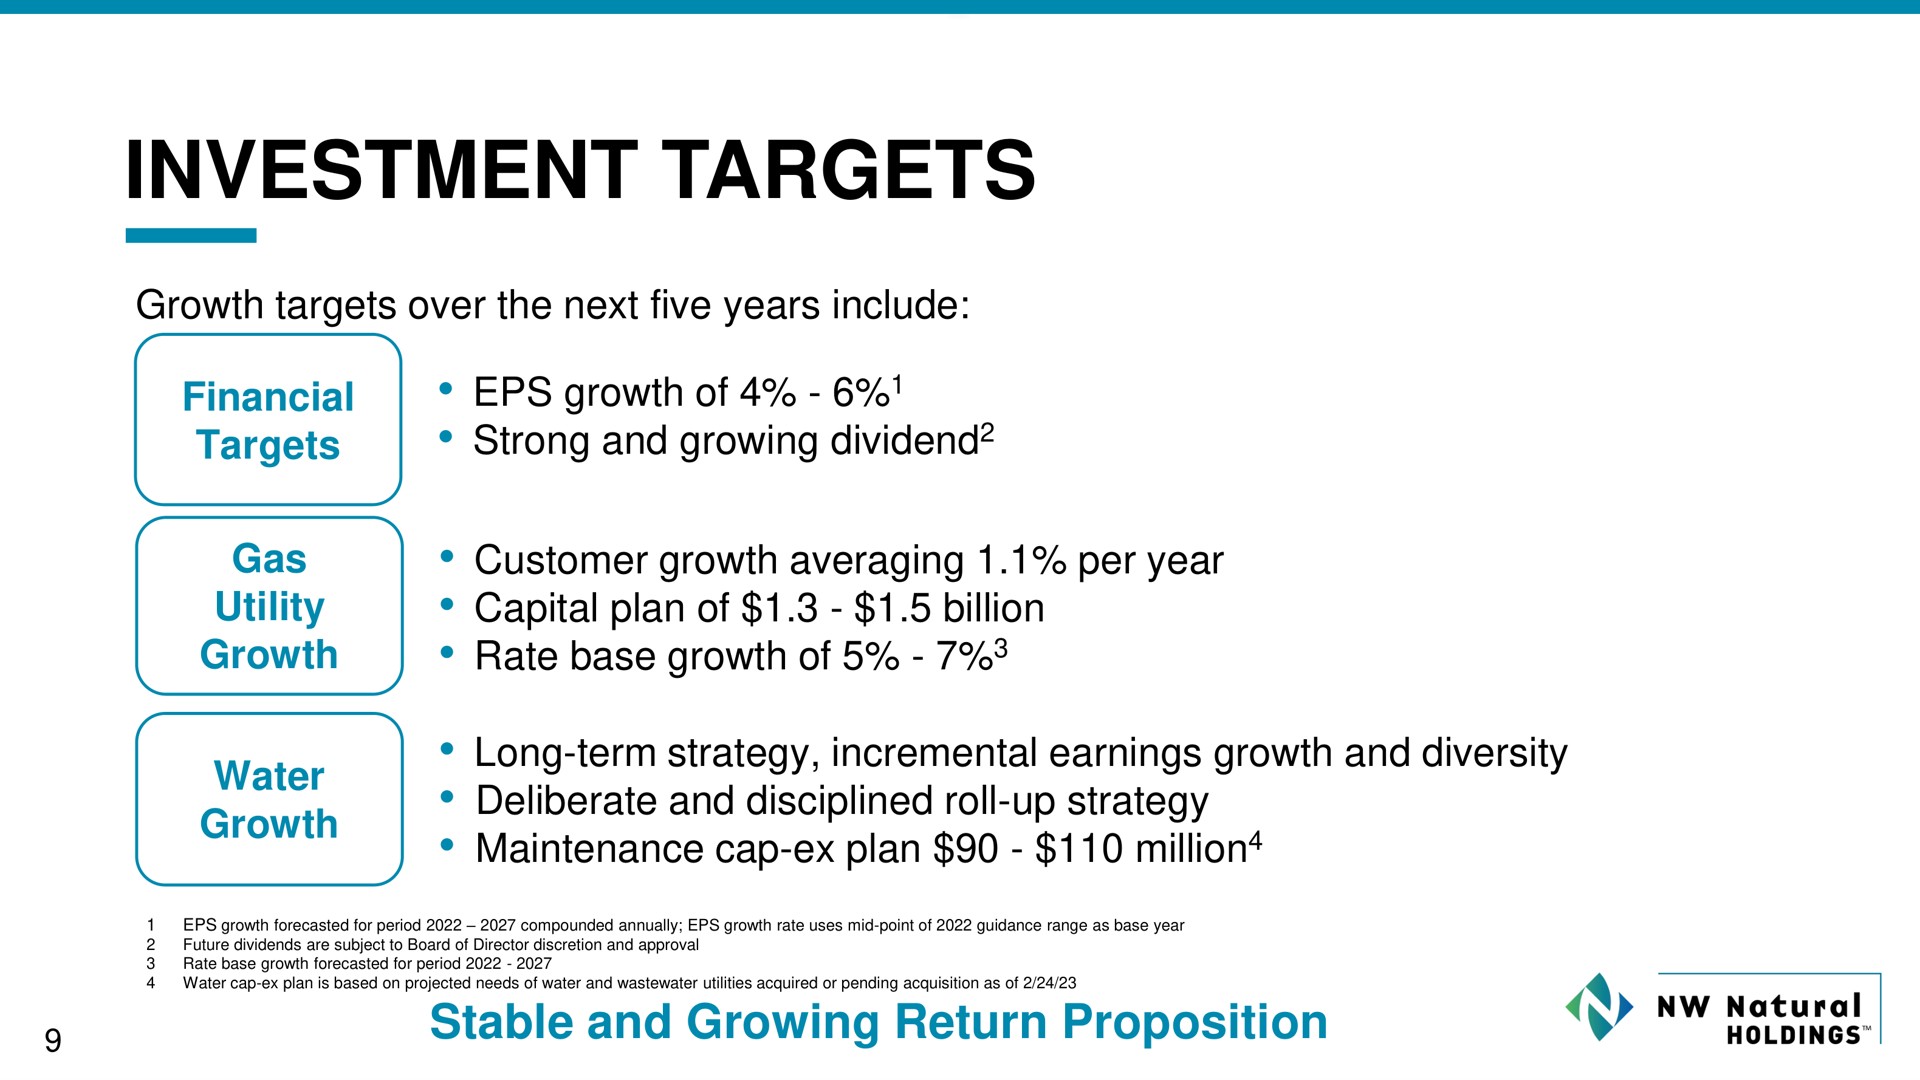 investment targets | NW Natural Holdings